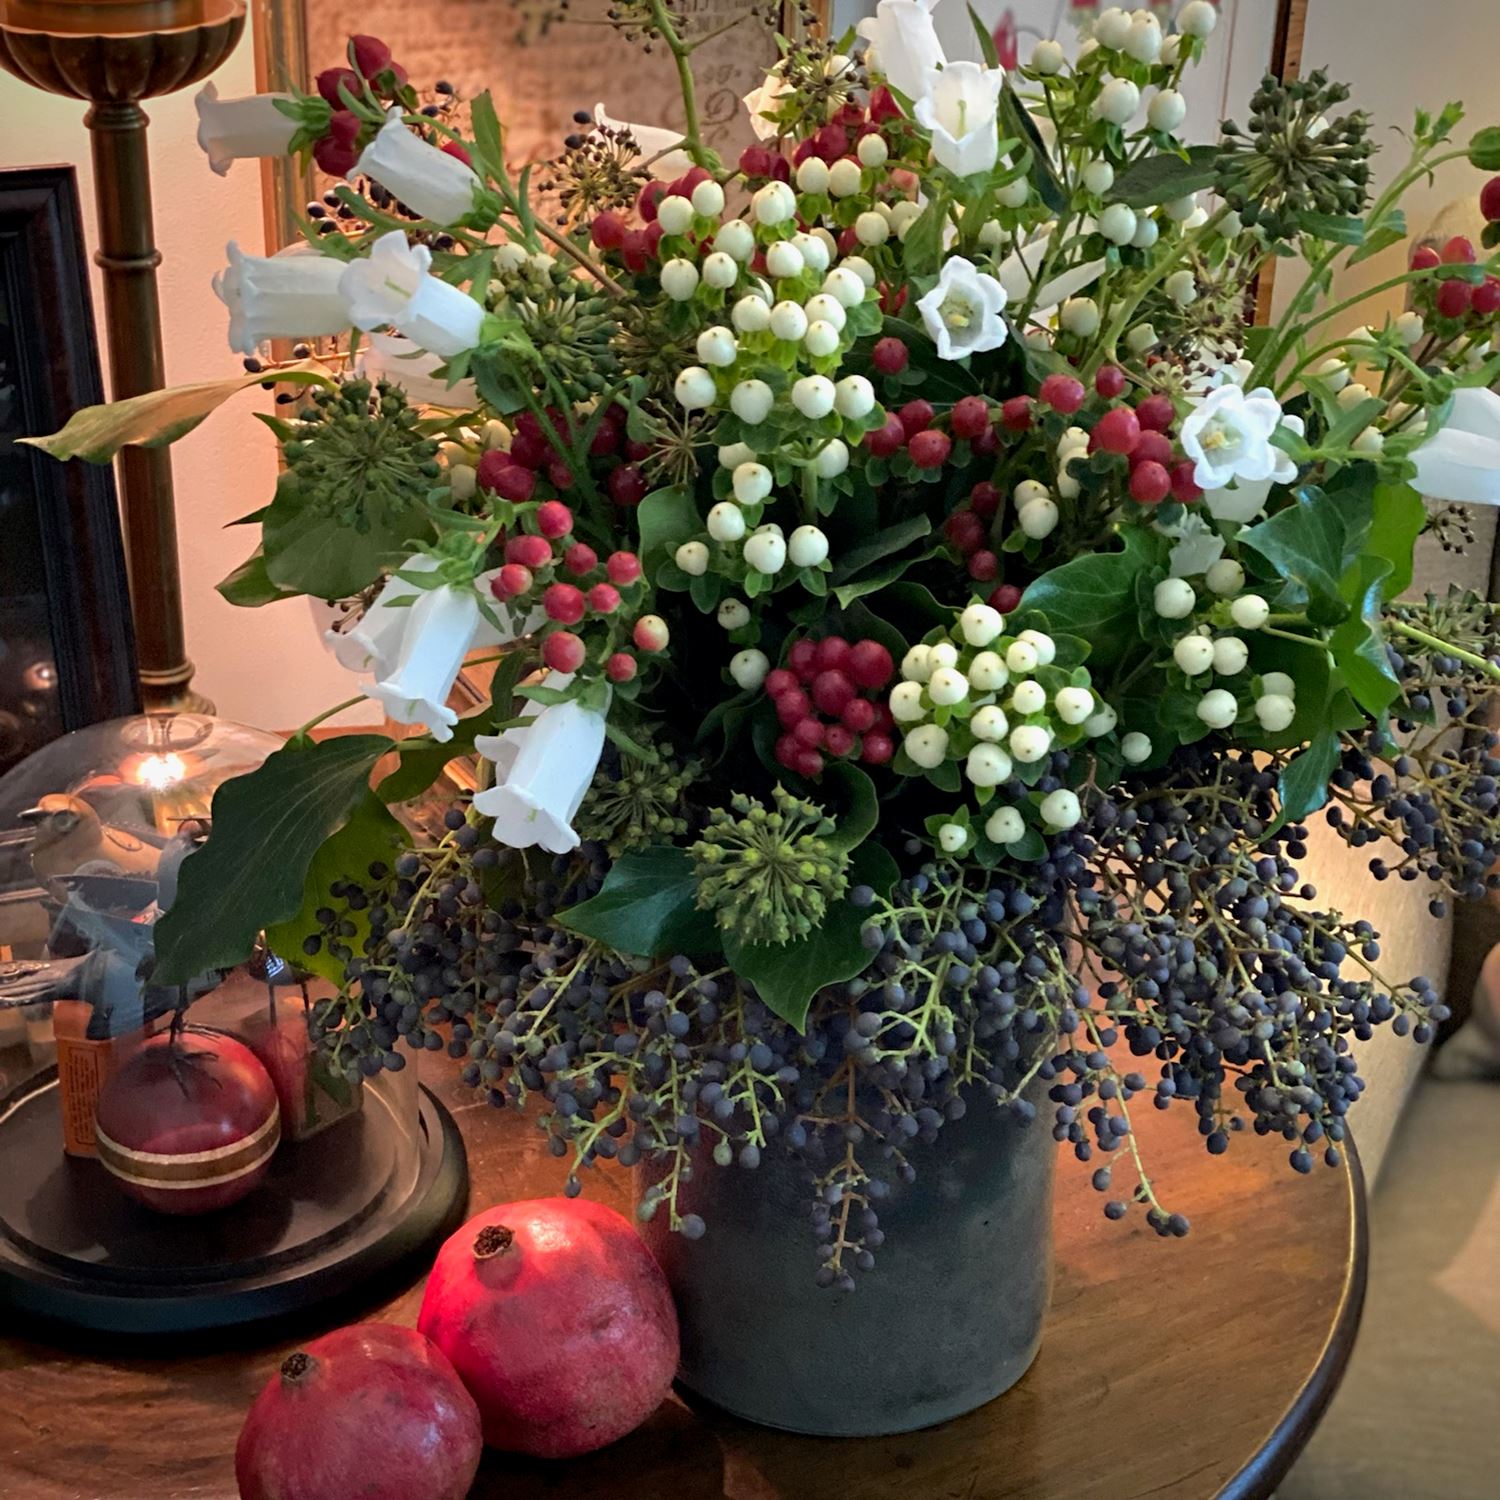 The Winter berry bouquet